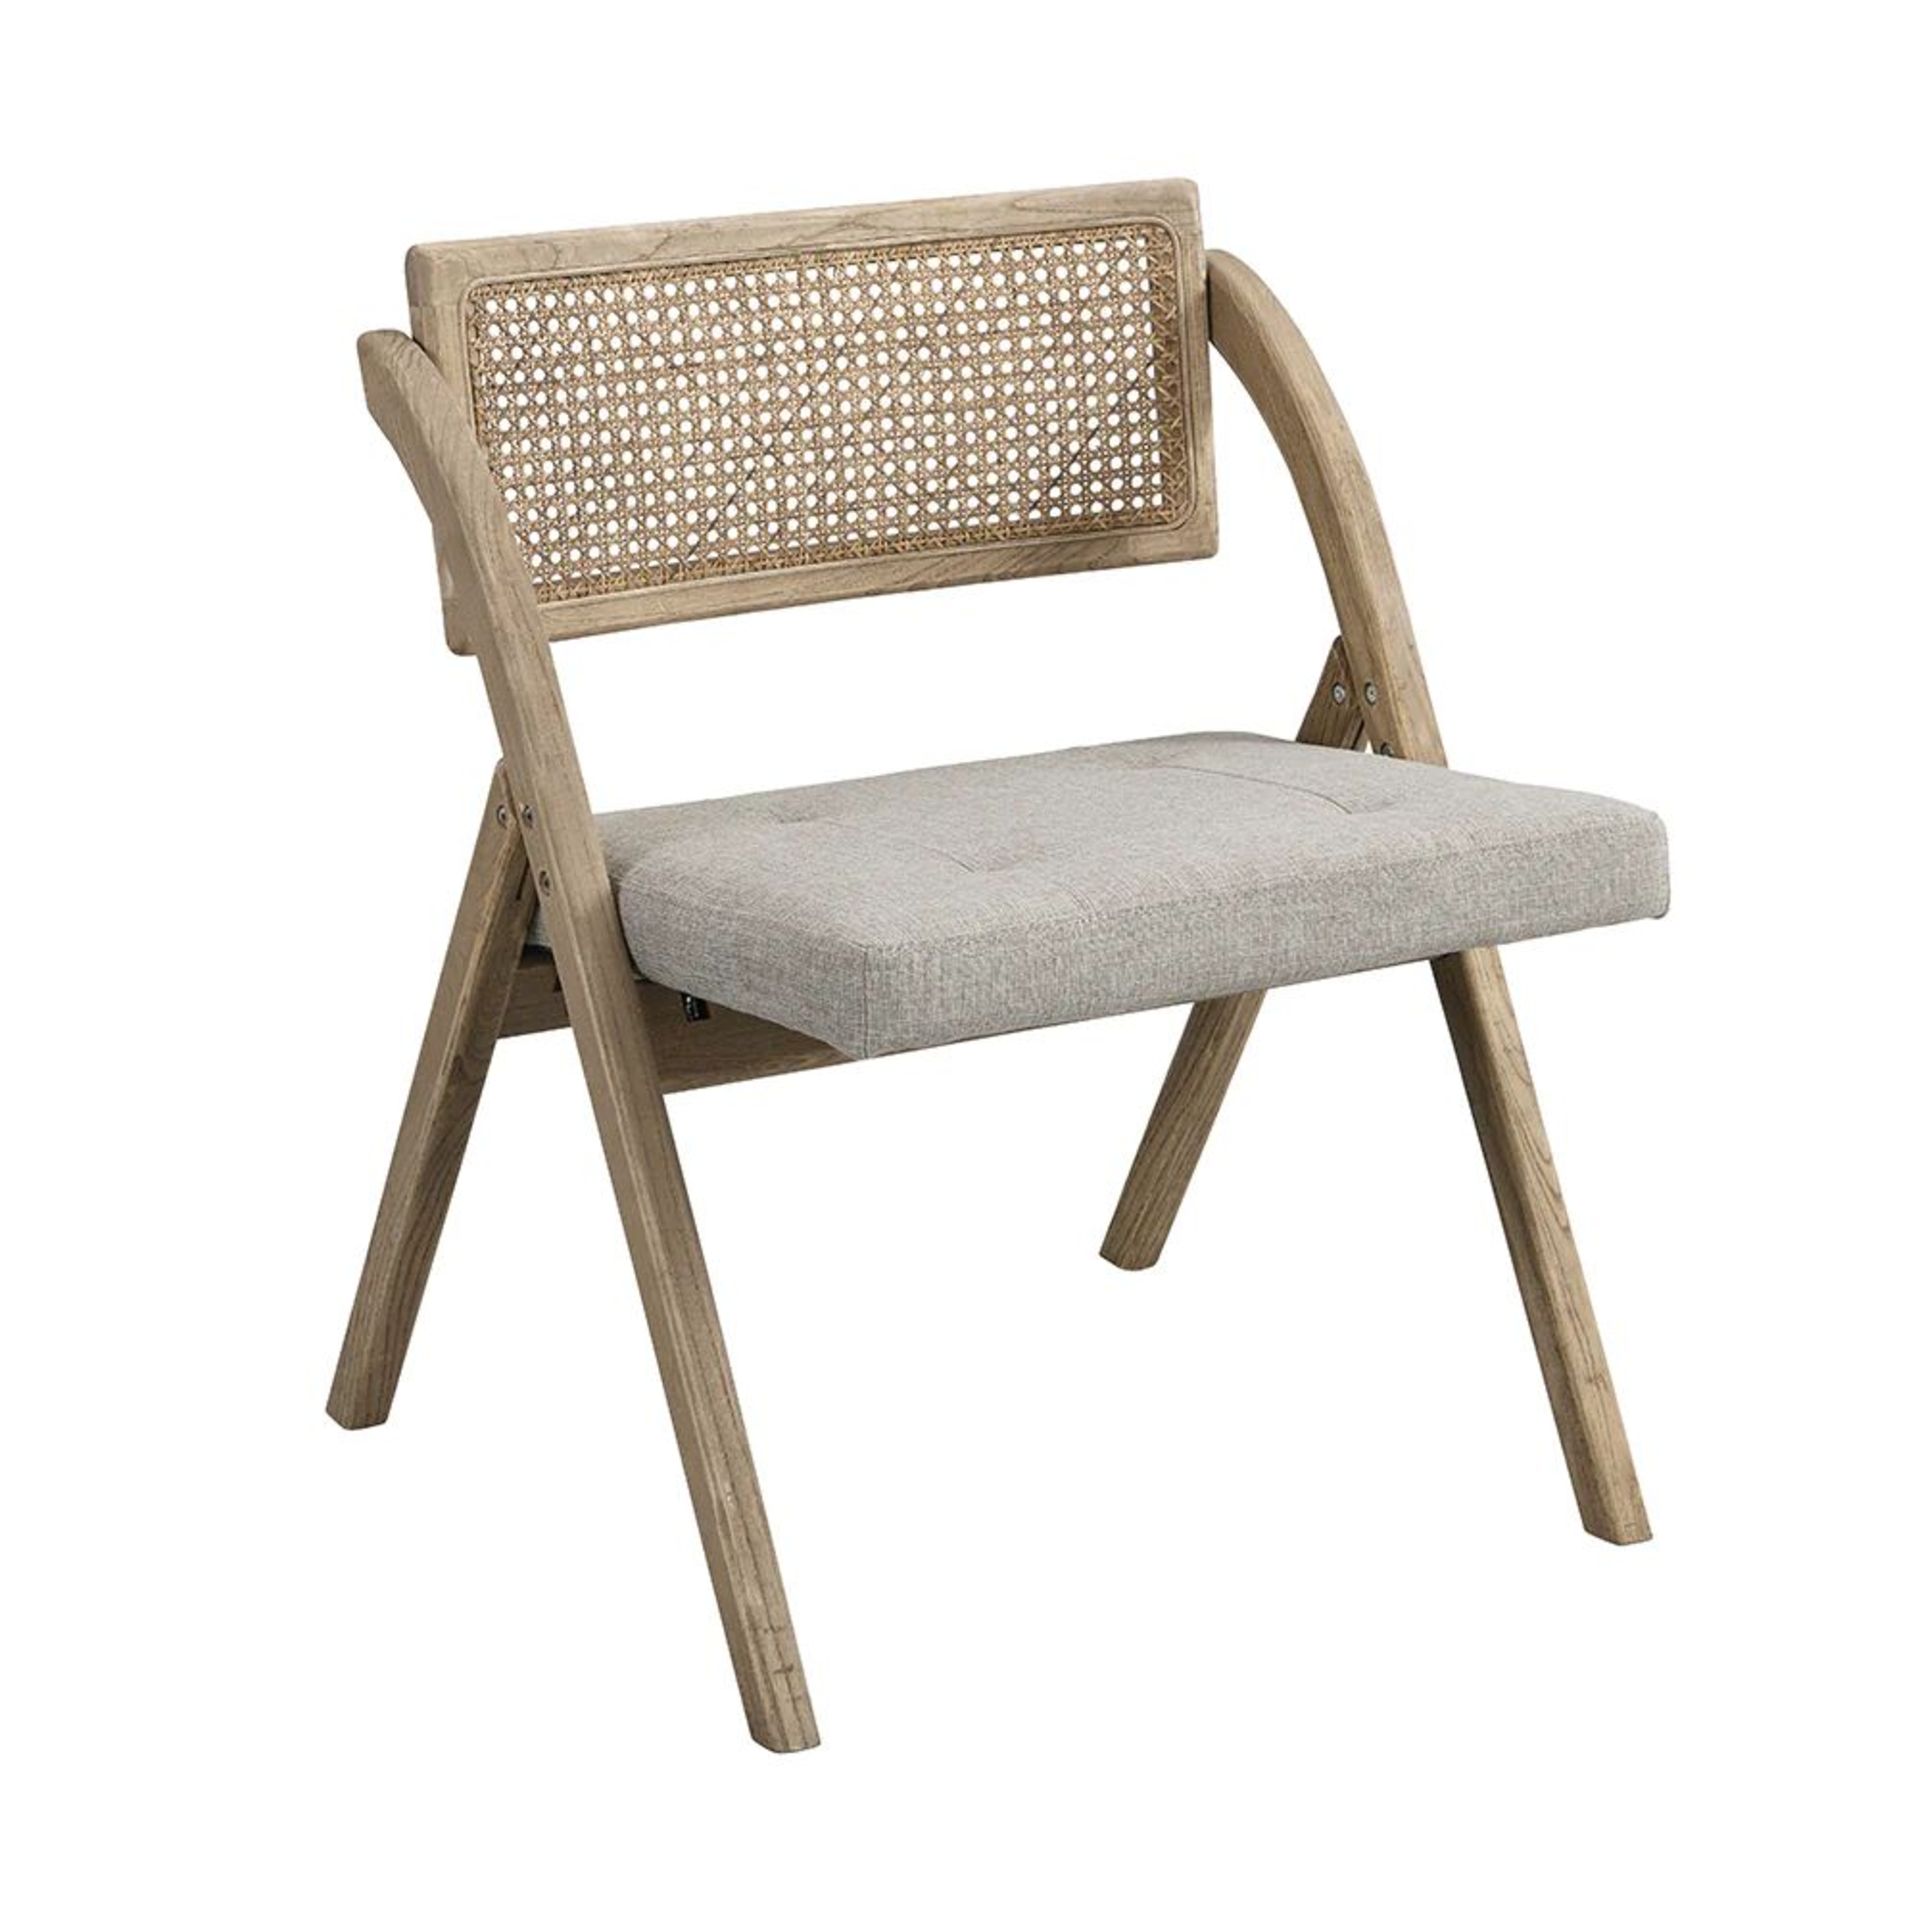 Bordon Natural Cane Rattan Folding Chair with Grey Upholstered Seat. -ER31. RRP £189.99. Made from - Image 2 of 2